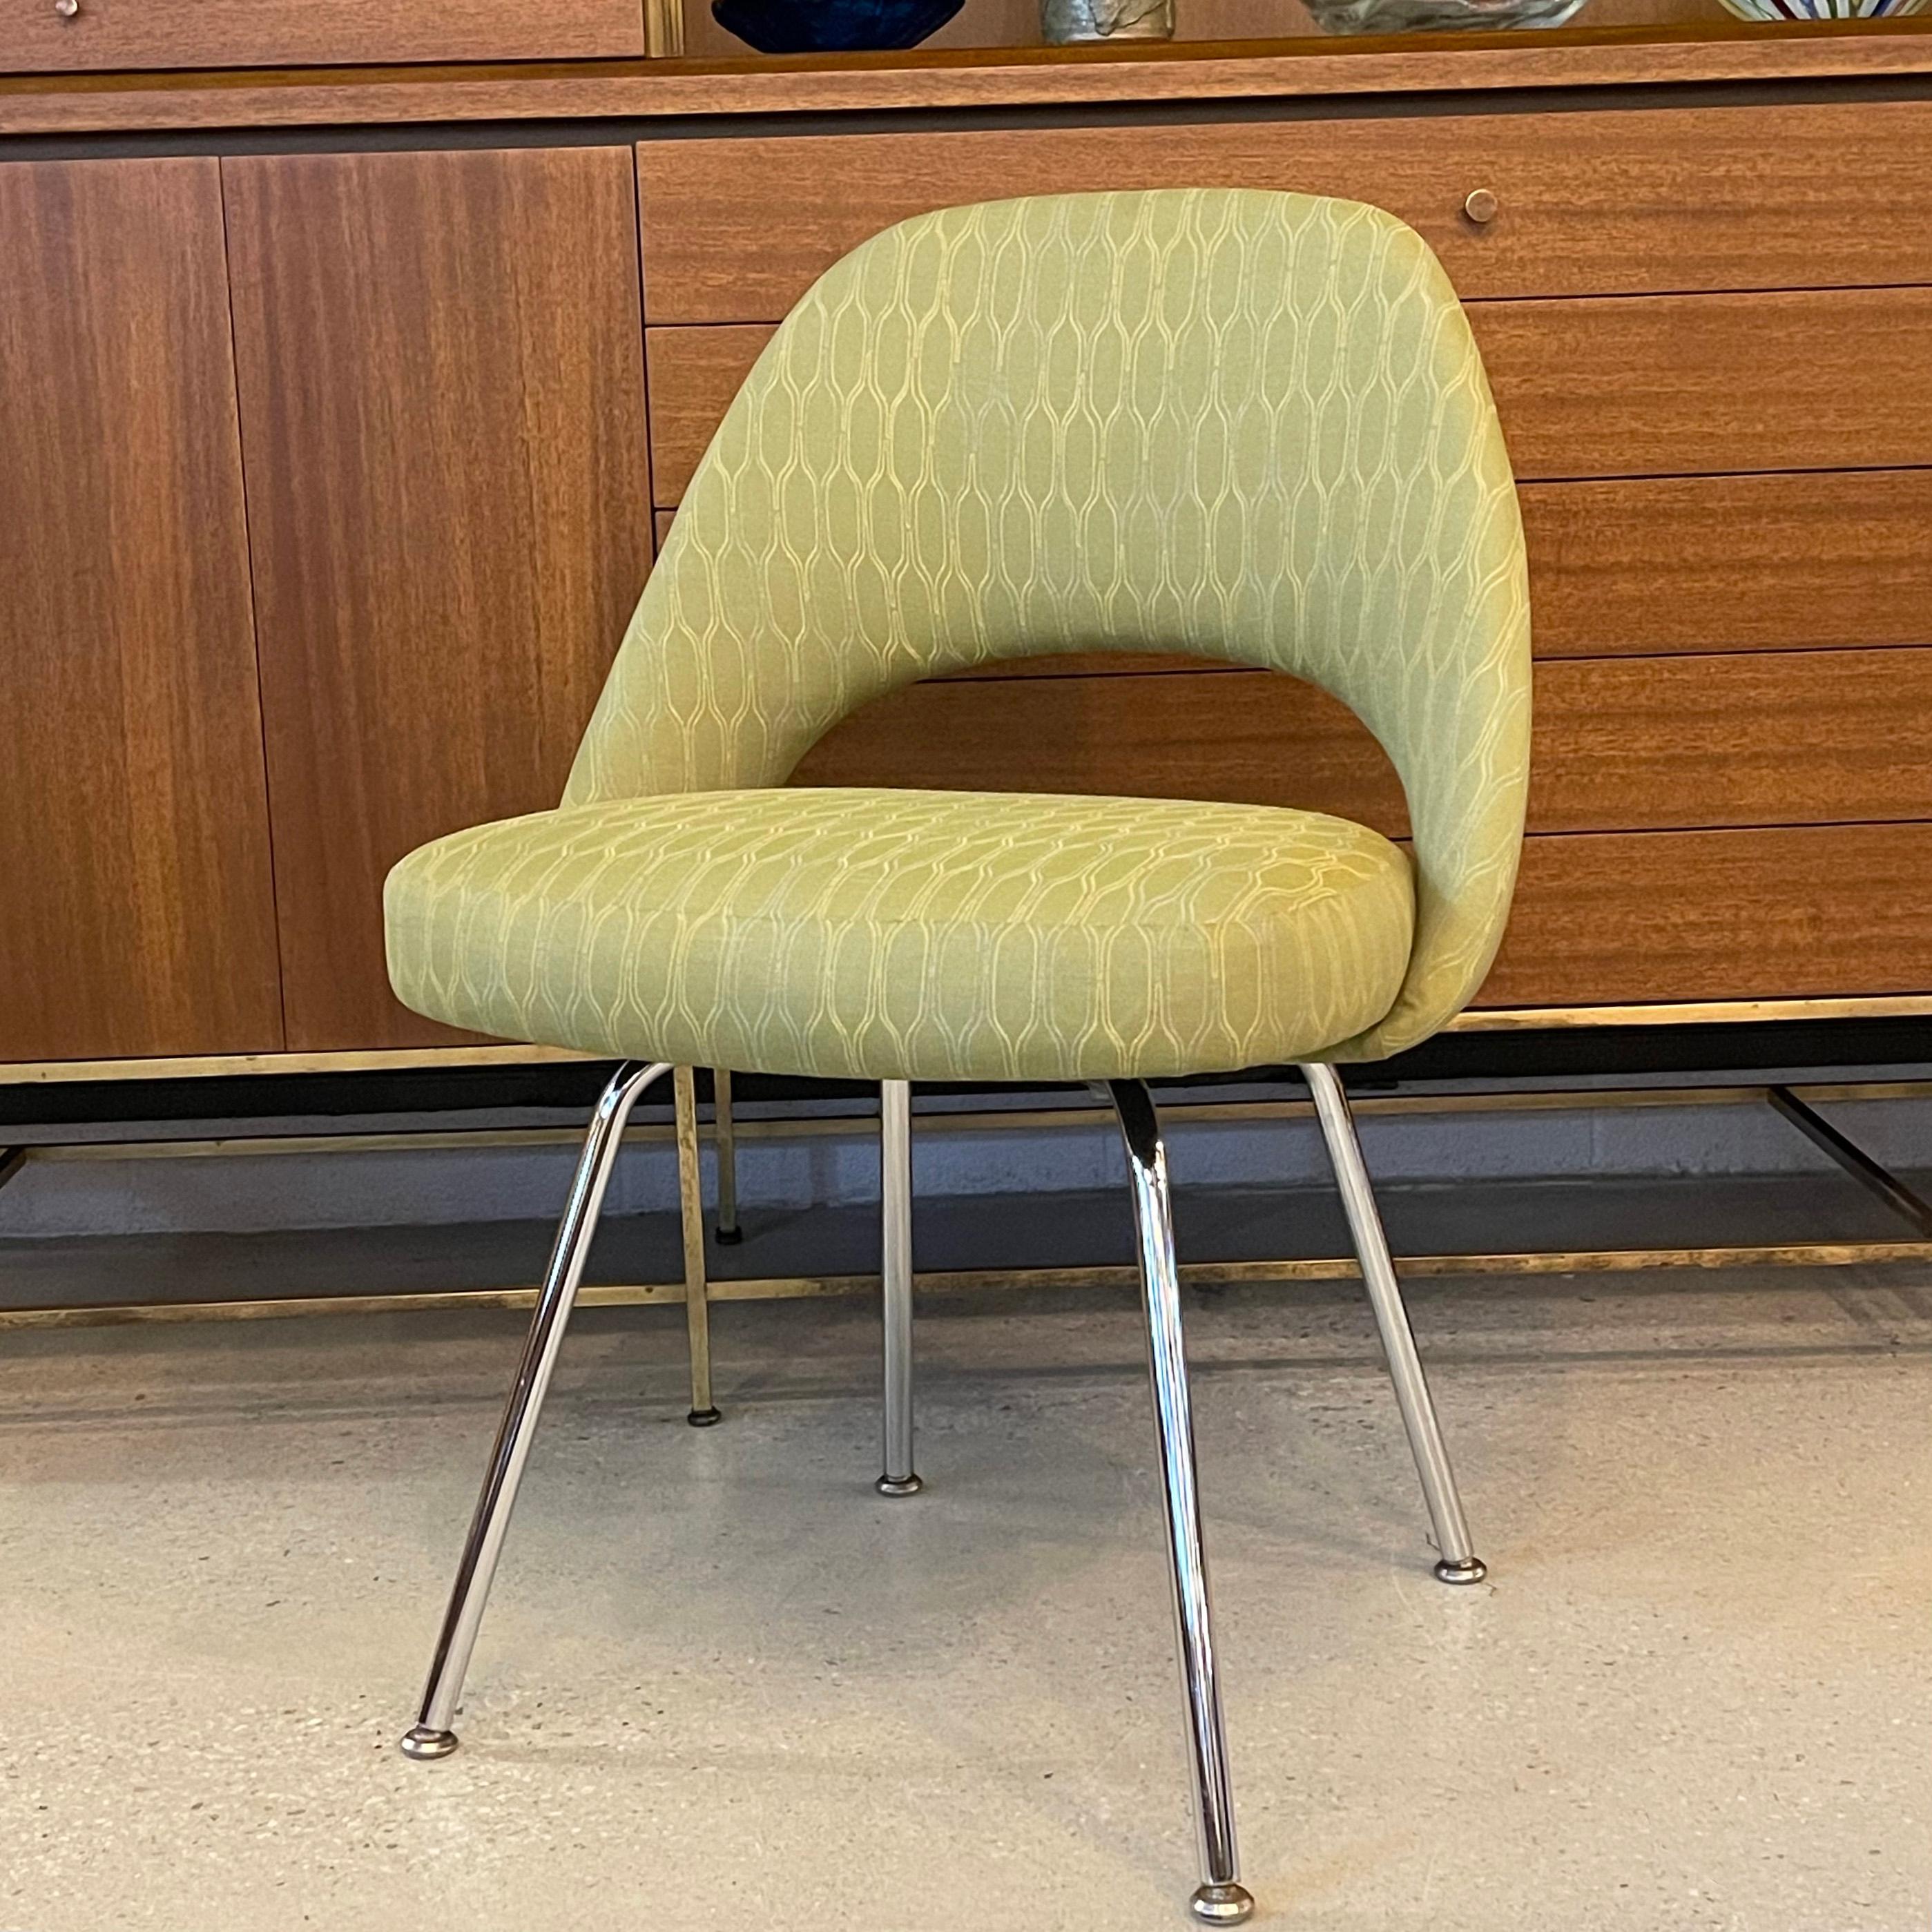 Executive side chair by Eero Saarinen for Knoll features green print, linen blend upholstery with chrome legs. This iconic chair is extremely comfortable and is the epitome of mid-century modern design. 
